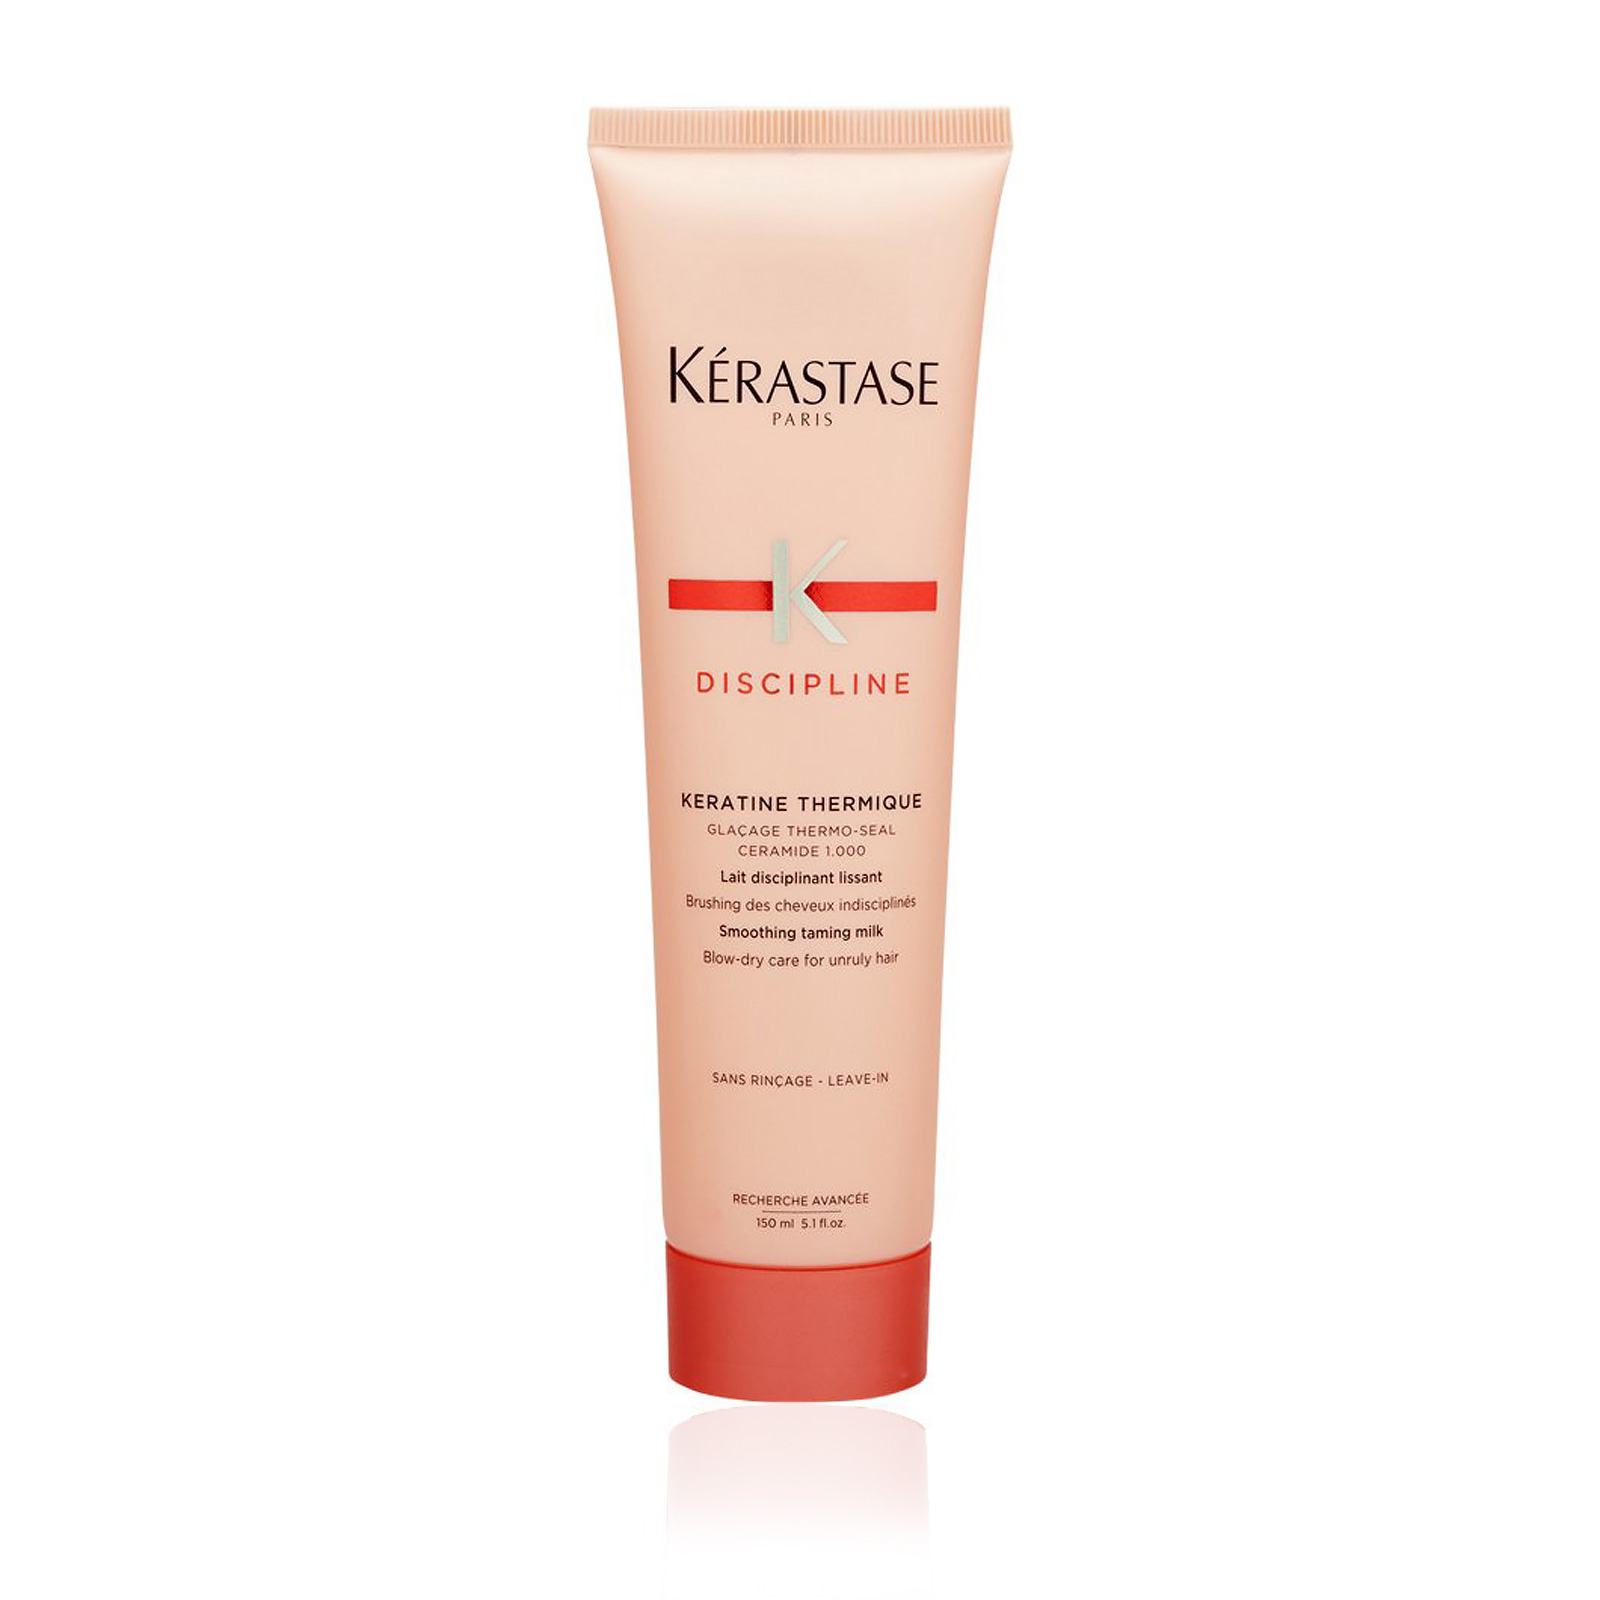 Discipline Keratine Thermique Smoothing Taming Milk (For Unruly Hair)